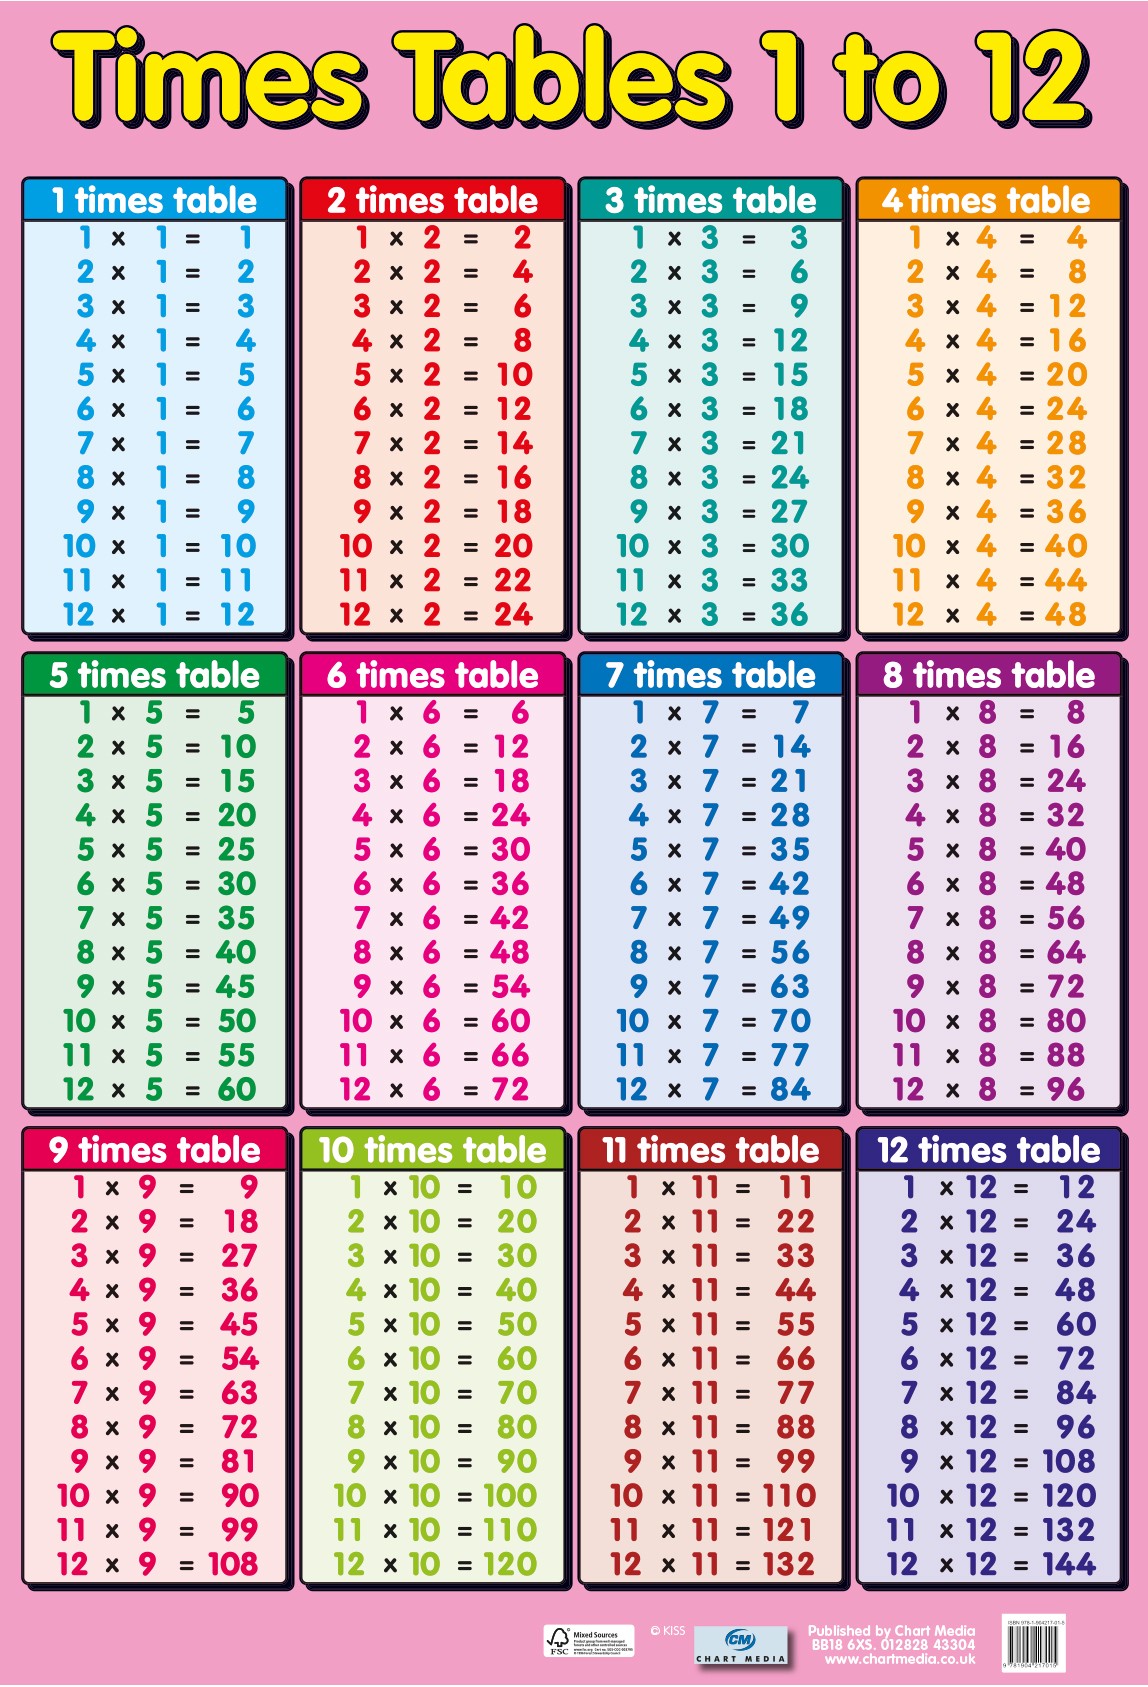 Times Tables 1 to 12 poster by Chart Media | Chart Media